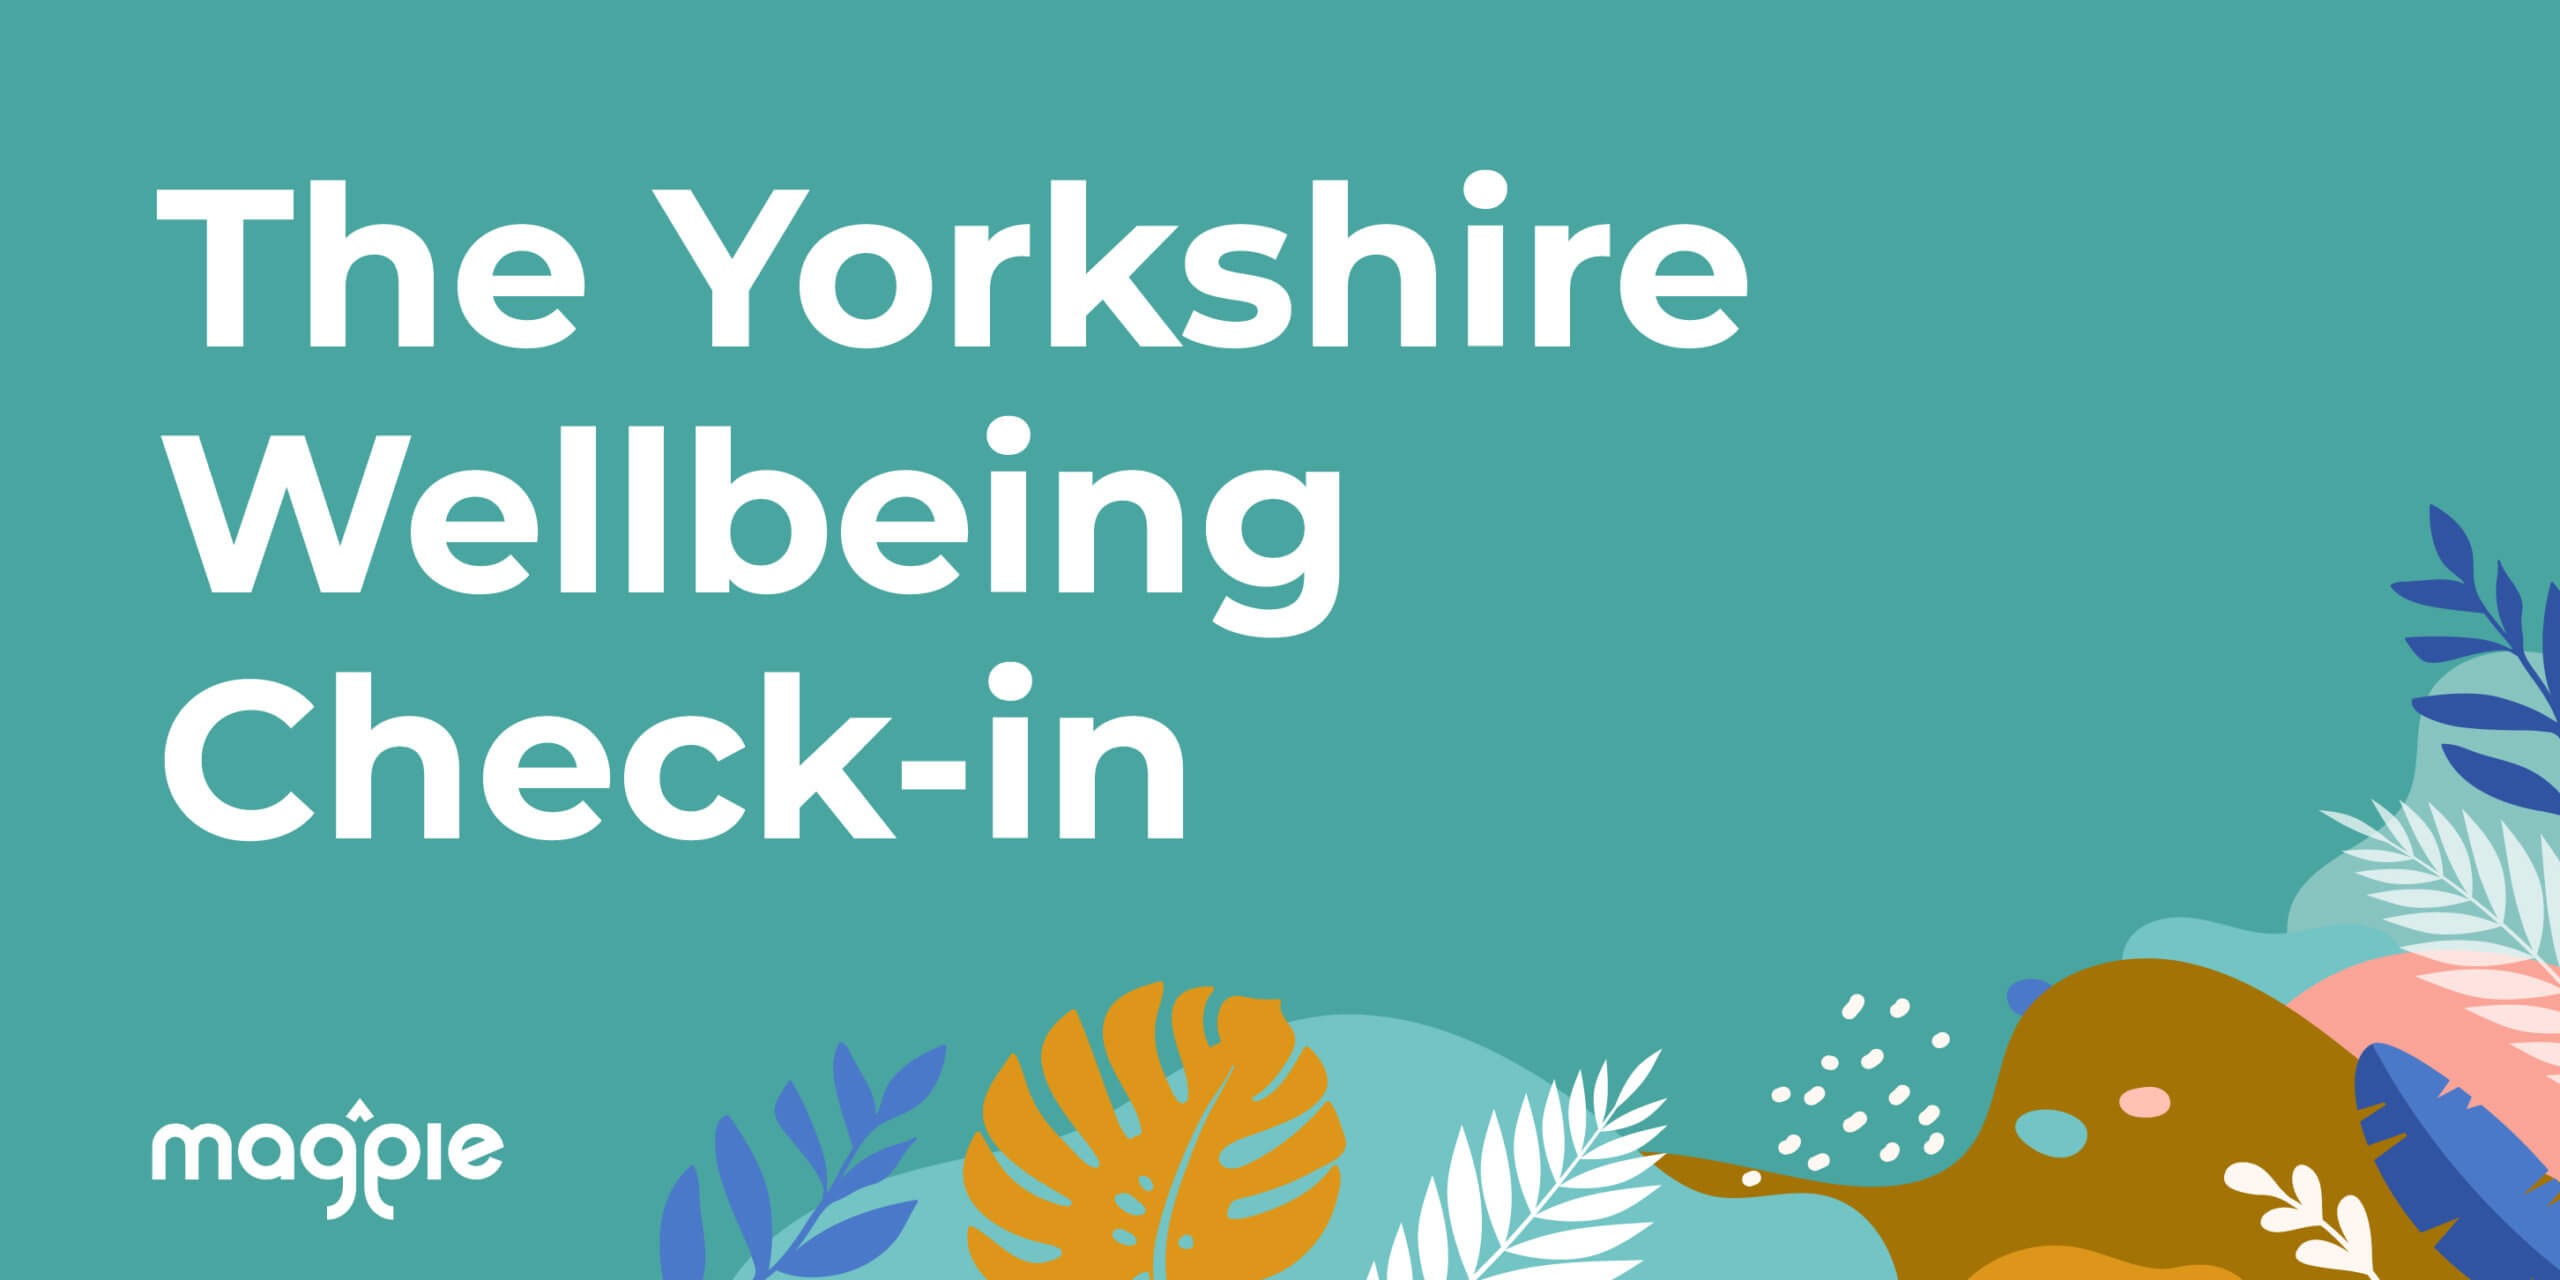 The Yorkshire Wellbeing Check-in